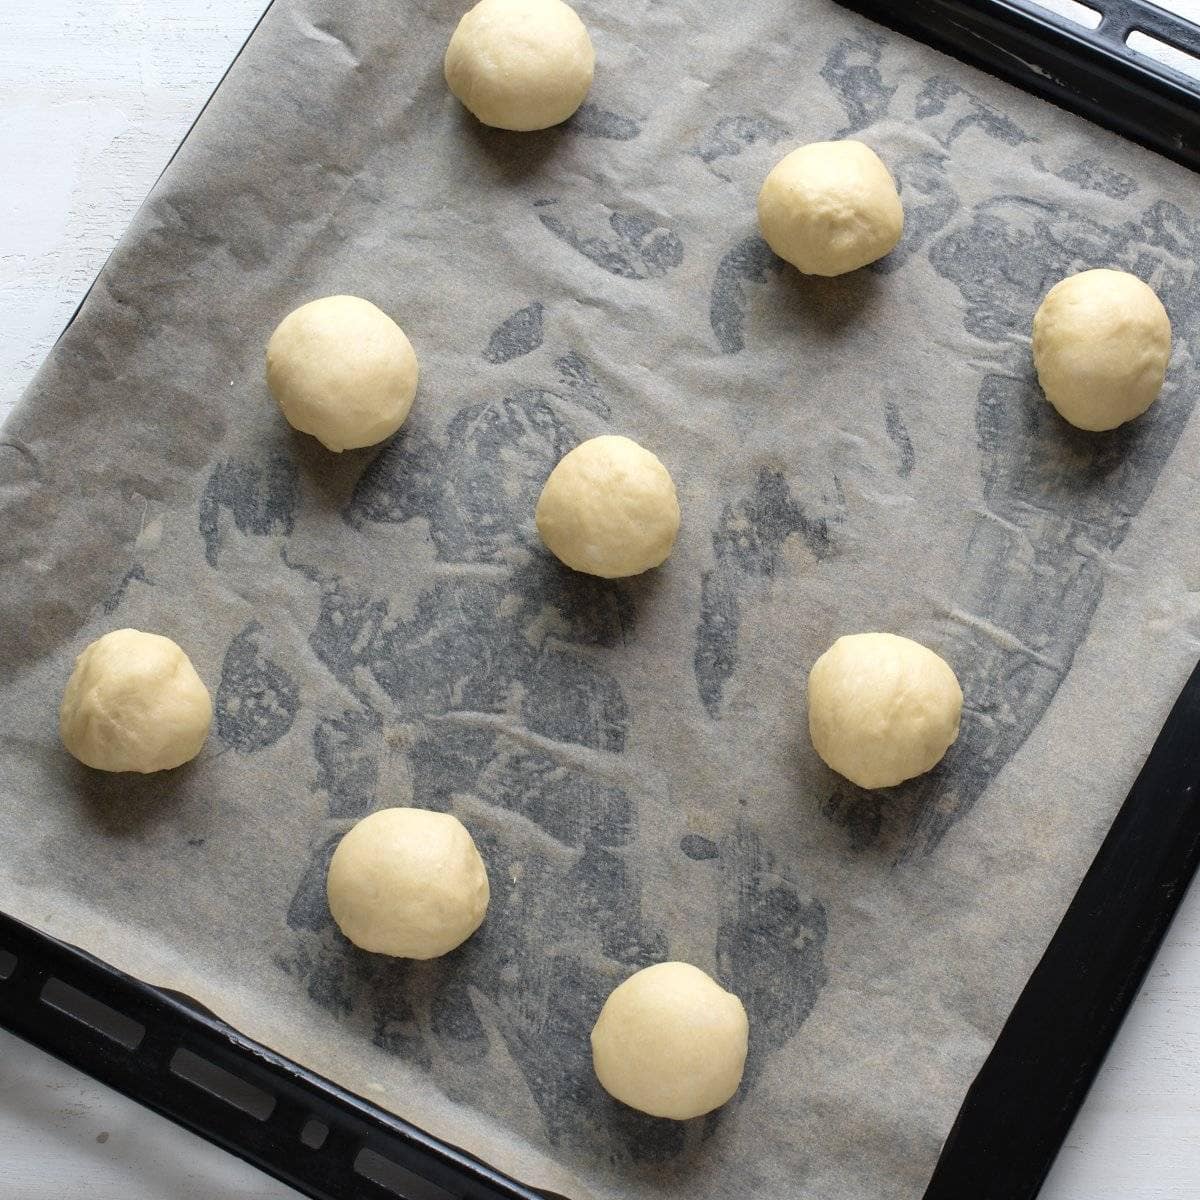 Balls of yeast dough placed on a lined baking sheet.